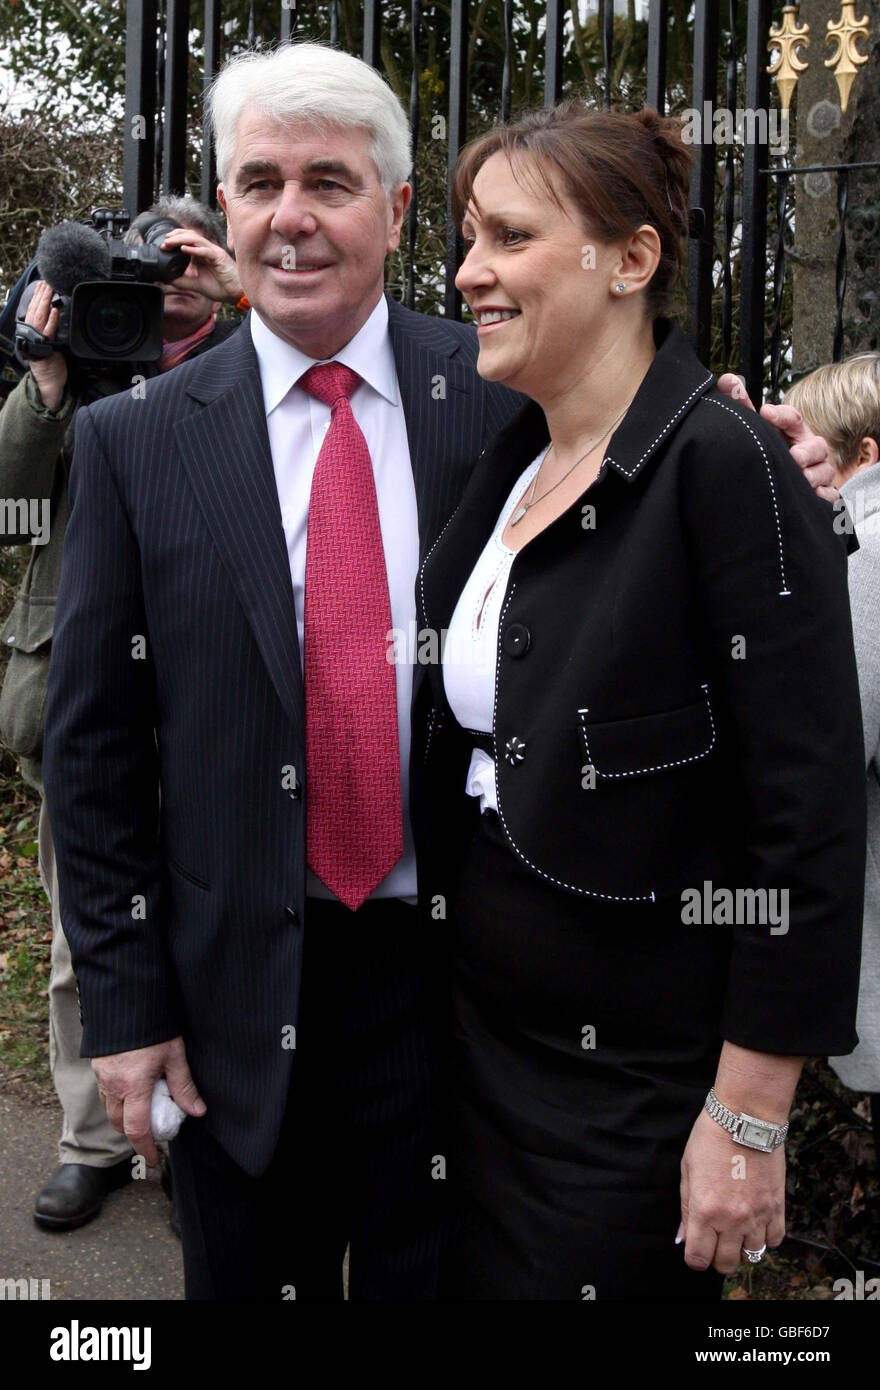 RESTRANSMITTED CORRECTING SURNAME Max Clifford and Jo Westwood arrive at the wedding of Jade Goody and Jack Tweed at Down Hall Country House Hotel Near Hatfield Heath, Essex. Stock Photo